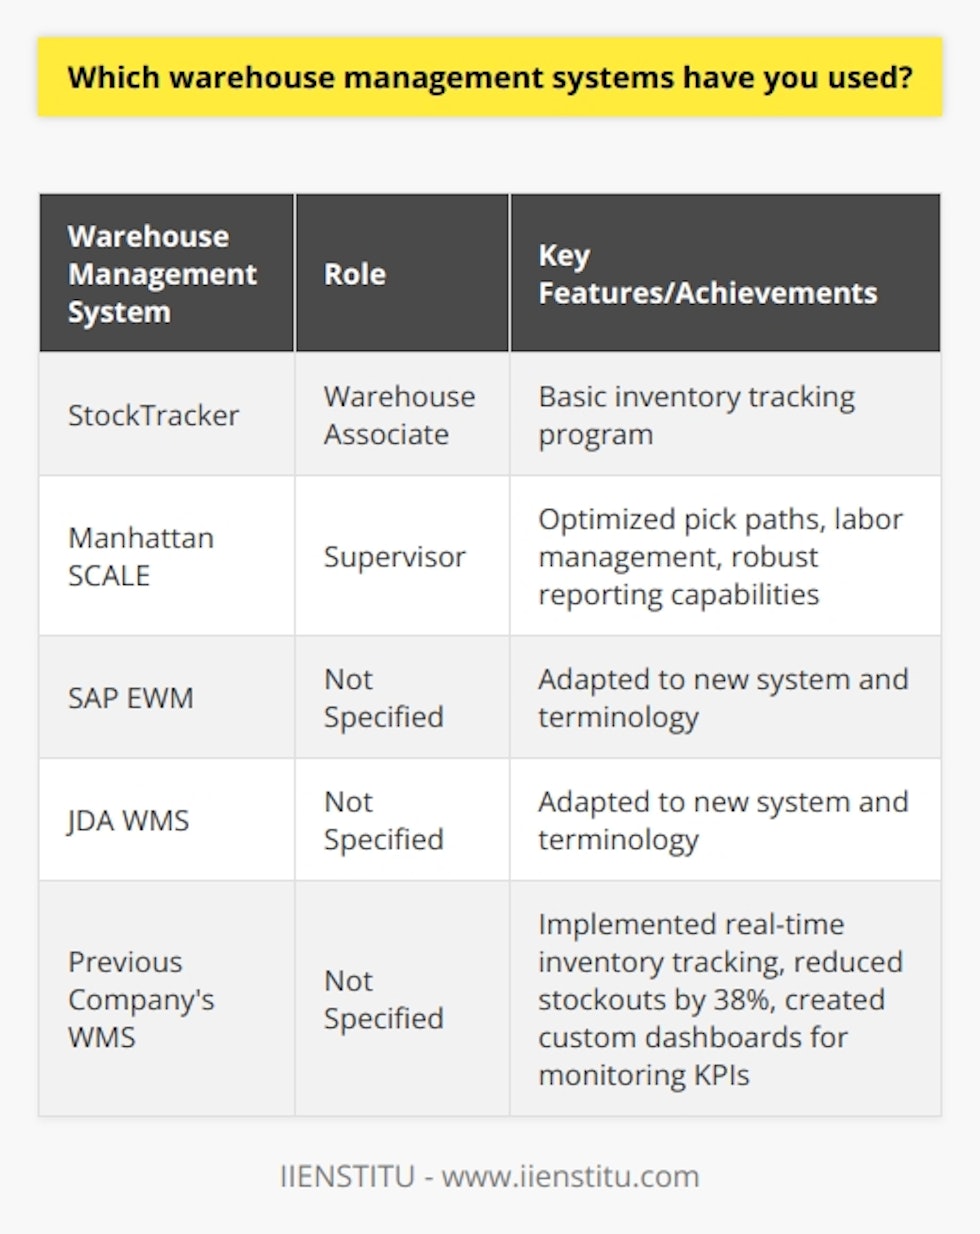 Experience with Warehouse Management Systems Throughout my career, Ive worked with several warehouse management systems. When I started out as a warehouse associate, we used a basic inventory tracking program called StockTracker. It got the job done, but it was pretty bare-bones compared to the more advanced systems I used later on. Transitioning to More Advanced WMS Platforms As I moved up to supervisor roles, the companies I worked for invested in more sophisticated WMS solutions. One of my favorites was Manhattan SCALE. It had all these cool features for optimizing pick paths and managing labor. Plus, the reporting capabilities were super helpful for keeping tabs on KPIs. Adapting to Different Systems Ive also used SAP EWM and JDA WMS at different points. While theres always a learning curve with a new system, I found that a lot of the core concepts carry over. Things like cycle counting, slotting optimization, and cross-docking tend to work similarly across platforms. The biggest challenge is getting comfortable with the specific UI and terminology each vendor uses. Leveraging WMS to Drive Improvements Regardless of the system, Ive always tried to dive deep into the capabilities and leverage them to streamline operations. At my last job, I used our WMS to implement a real-time inventory tracking program that reduced stockouts by 38%. I also worked with our IT team to create custom dashboards for monitoring picking accuracy and on-time shipping performance. So in summary, Ive used a mix of systems over the years, from simple to complex. But what matters most is understanding how to use them to drive continuous improvement. Thats what I aim to bring to the table here.